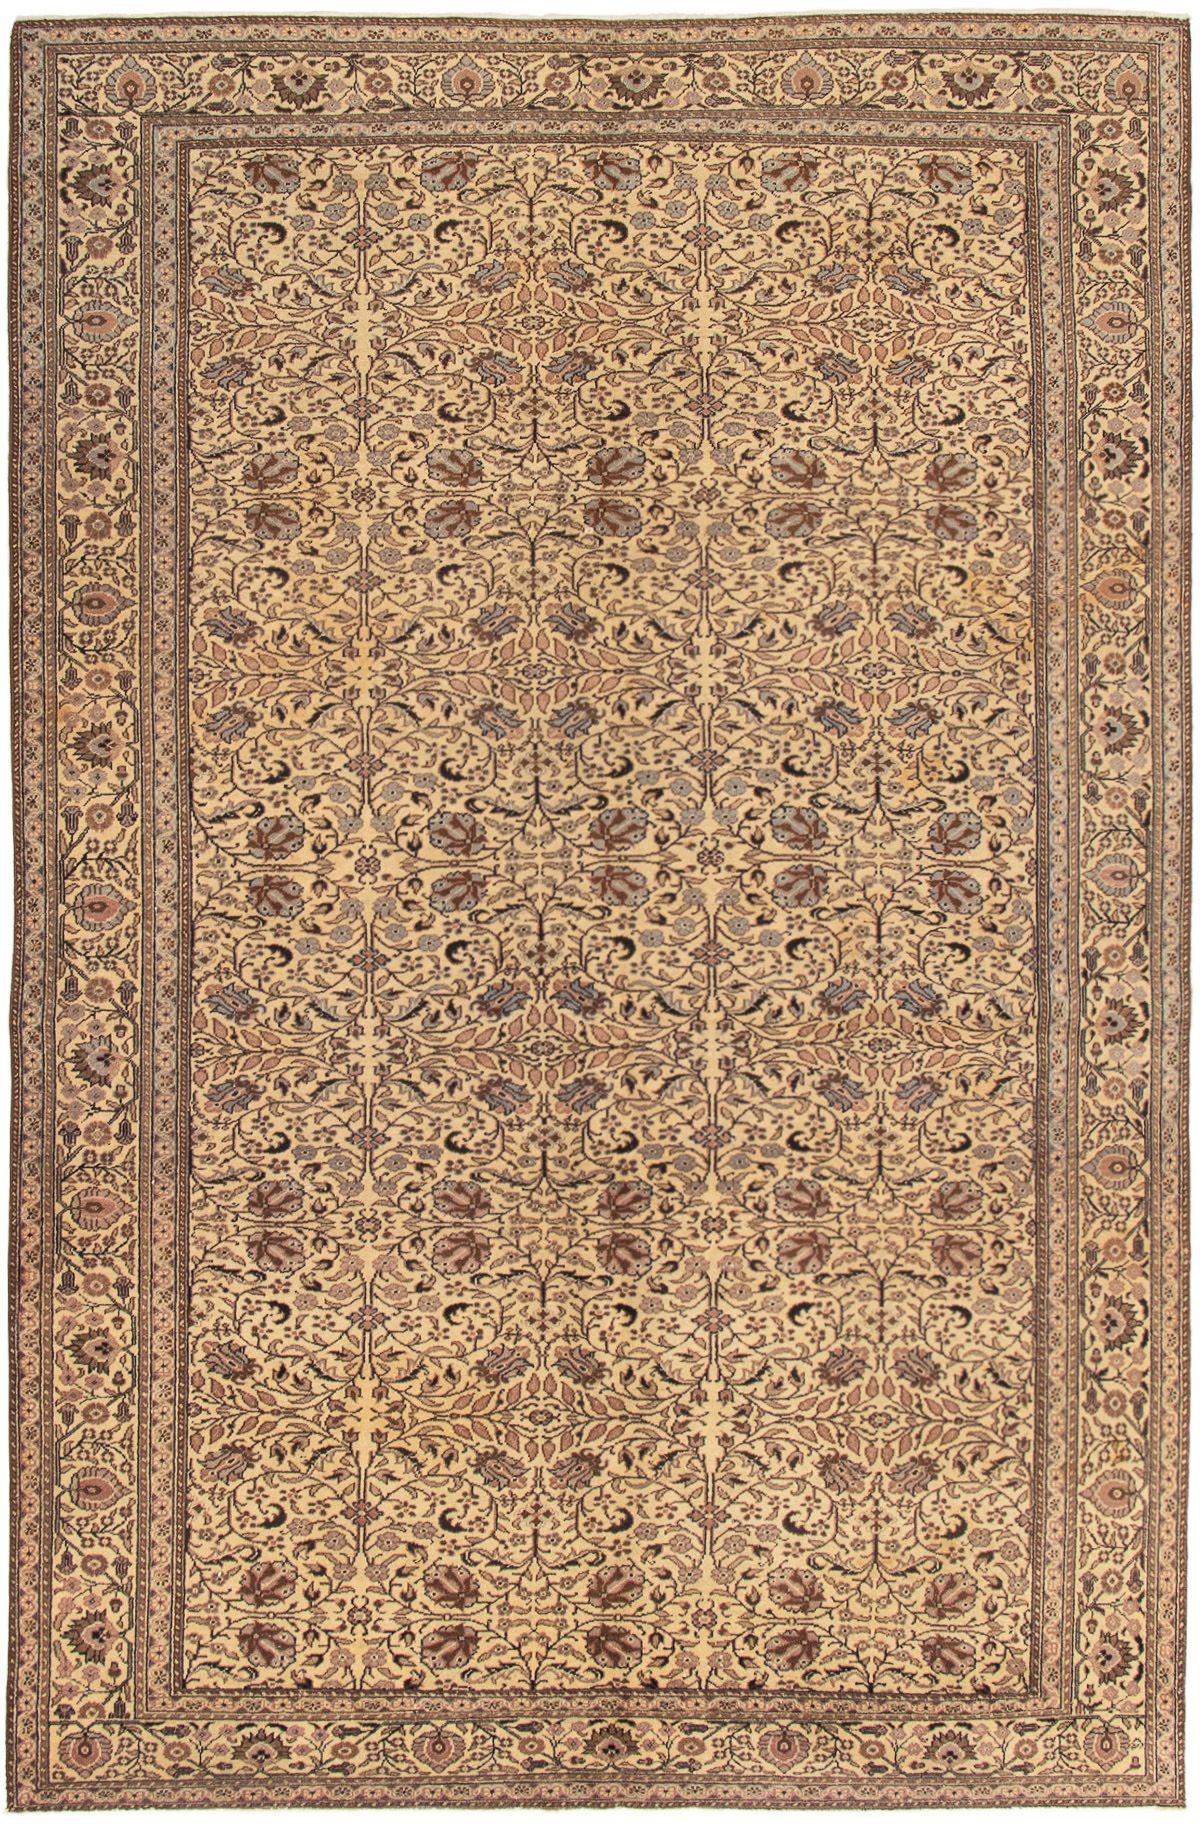 Hand-knotted Keisari Vintage Cream Wool Rug 6'5" x 9'11" Size: 6'5" x 9'11"  